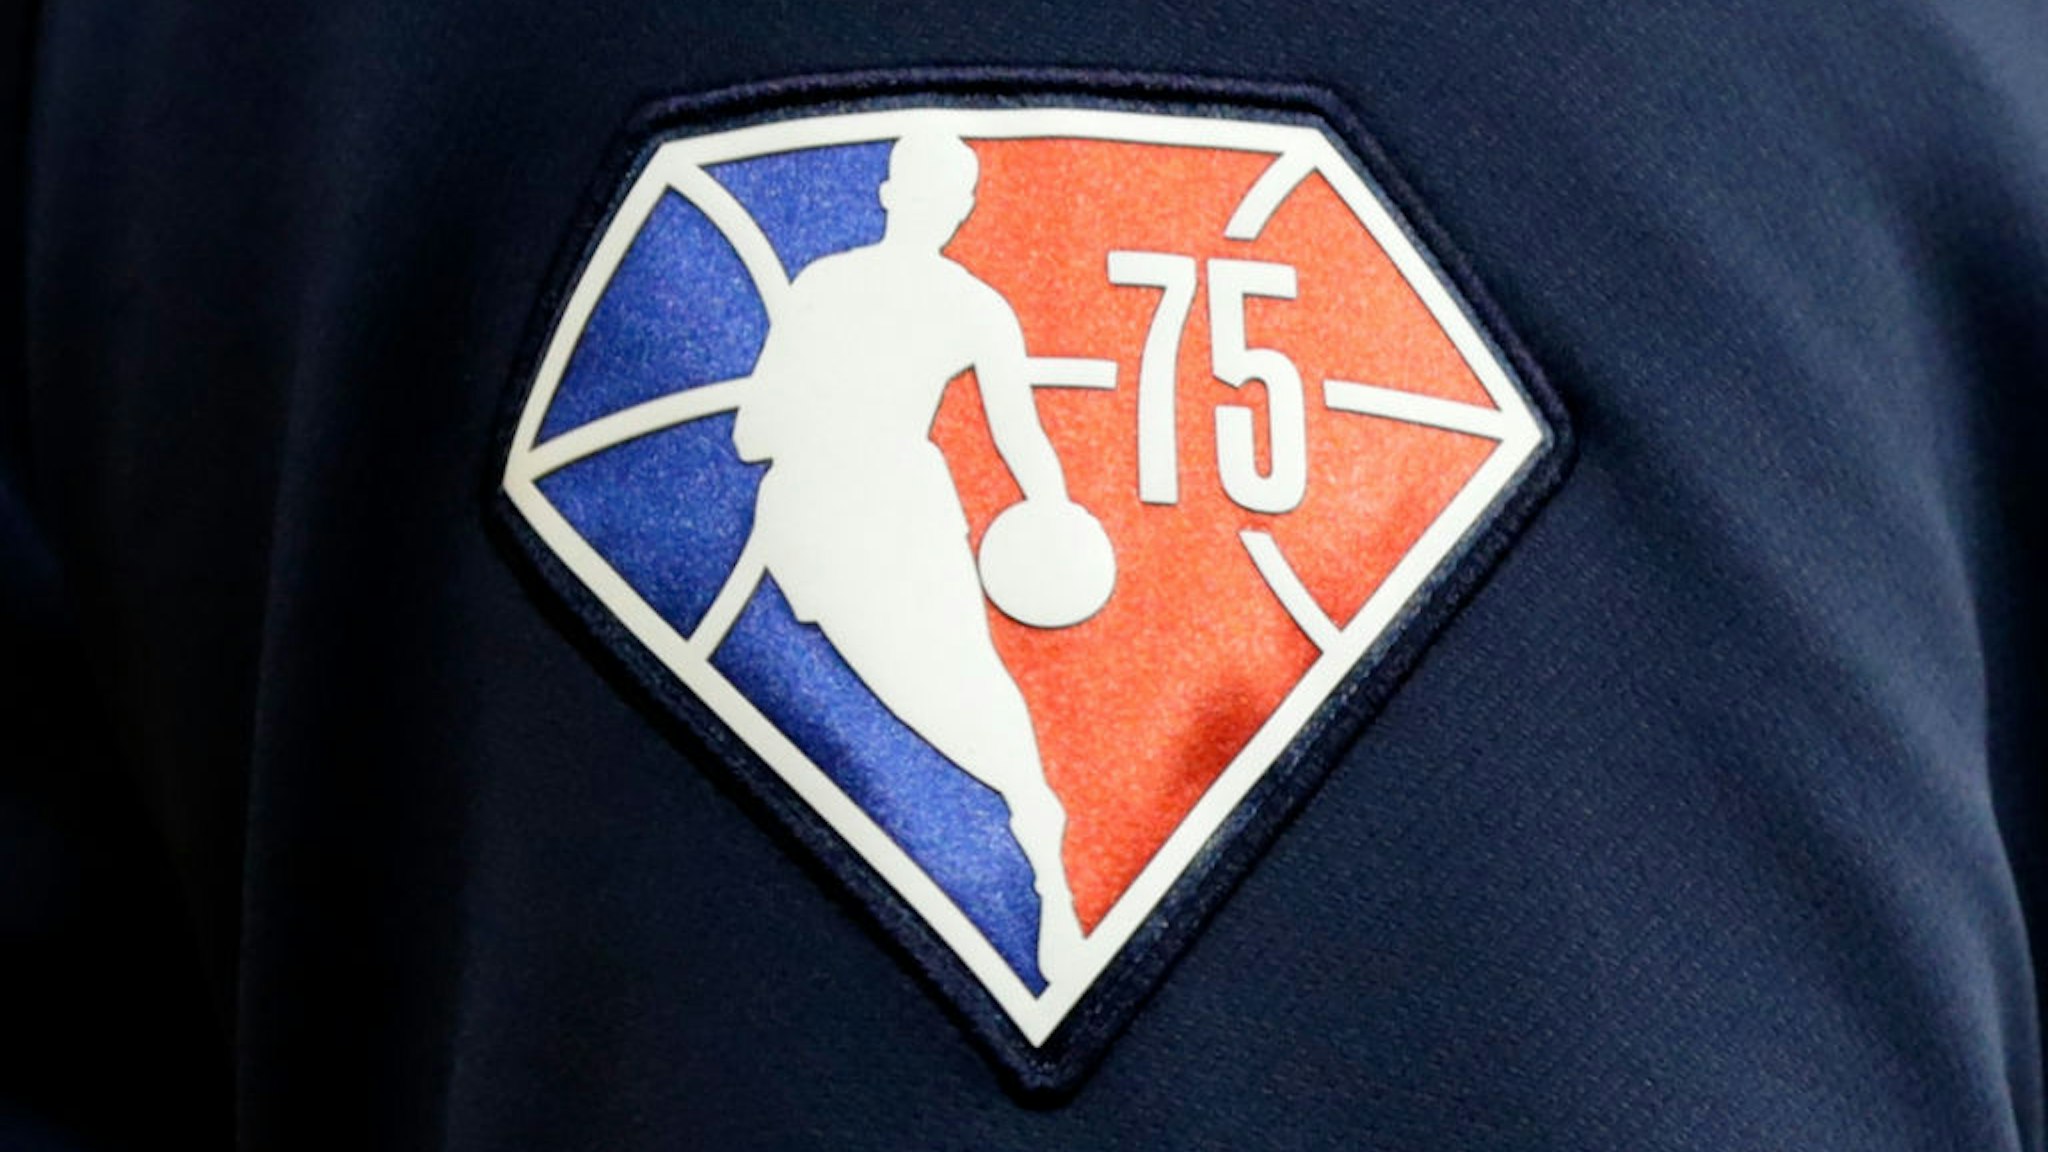 A detailed view of the 75th anniversary logo worn by a Utah Jazz player before the game against the Milwaukee Bucks at Fiserv Forum on October 31, 2021 in Milwaukee, Wisconsin. Jazz defeated the Bucks 107-95.